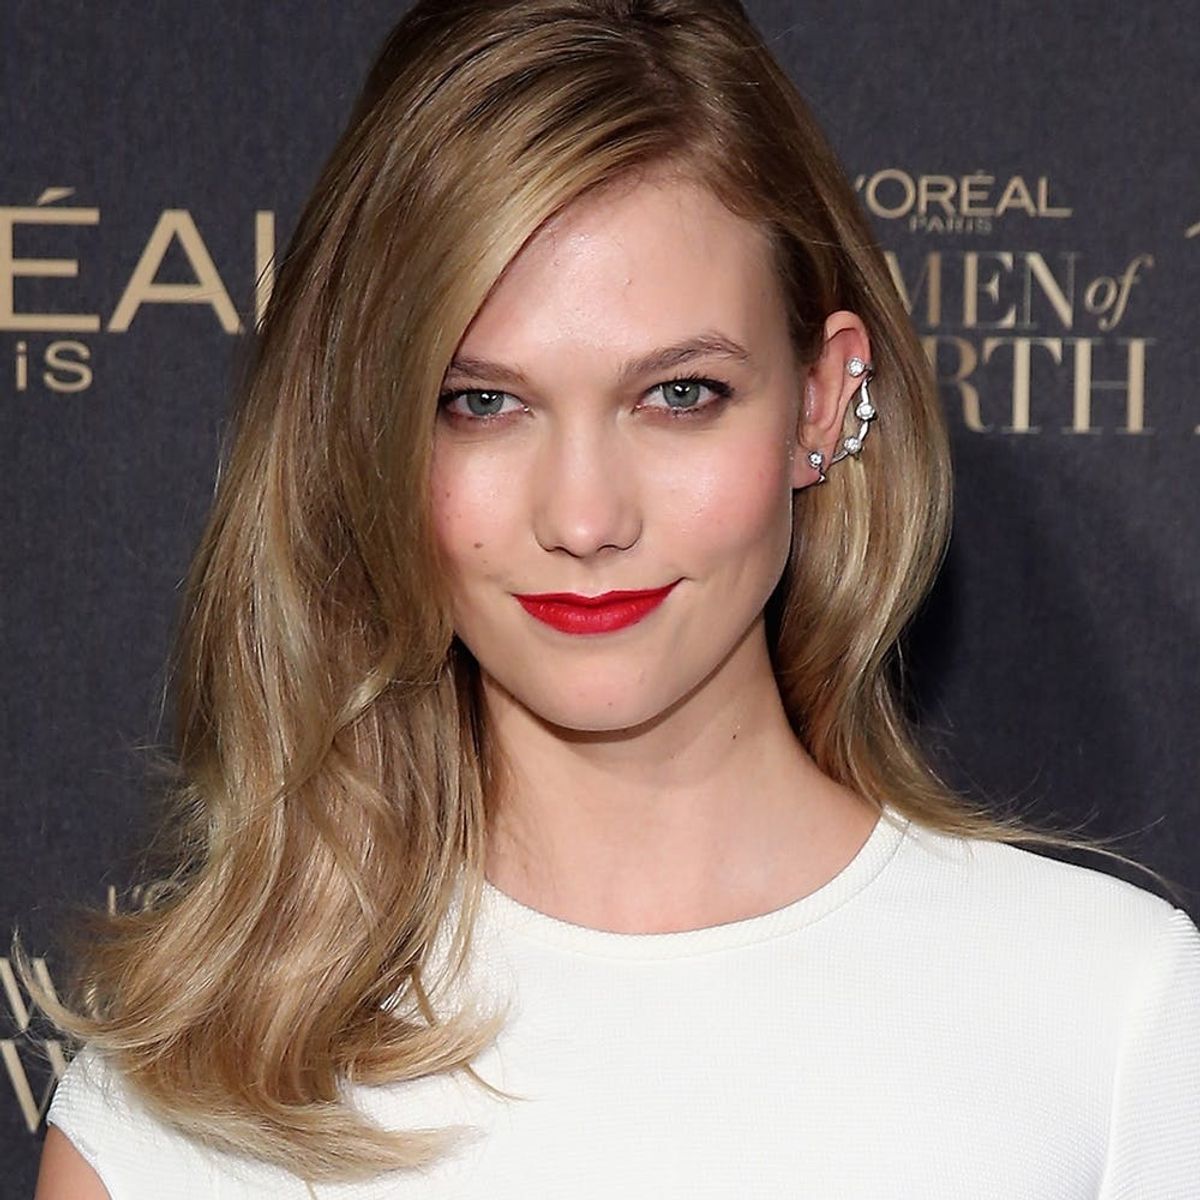 Karlie Kloss Is Starting the Coolest Summer Camp for Girls